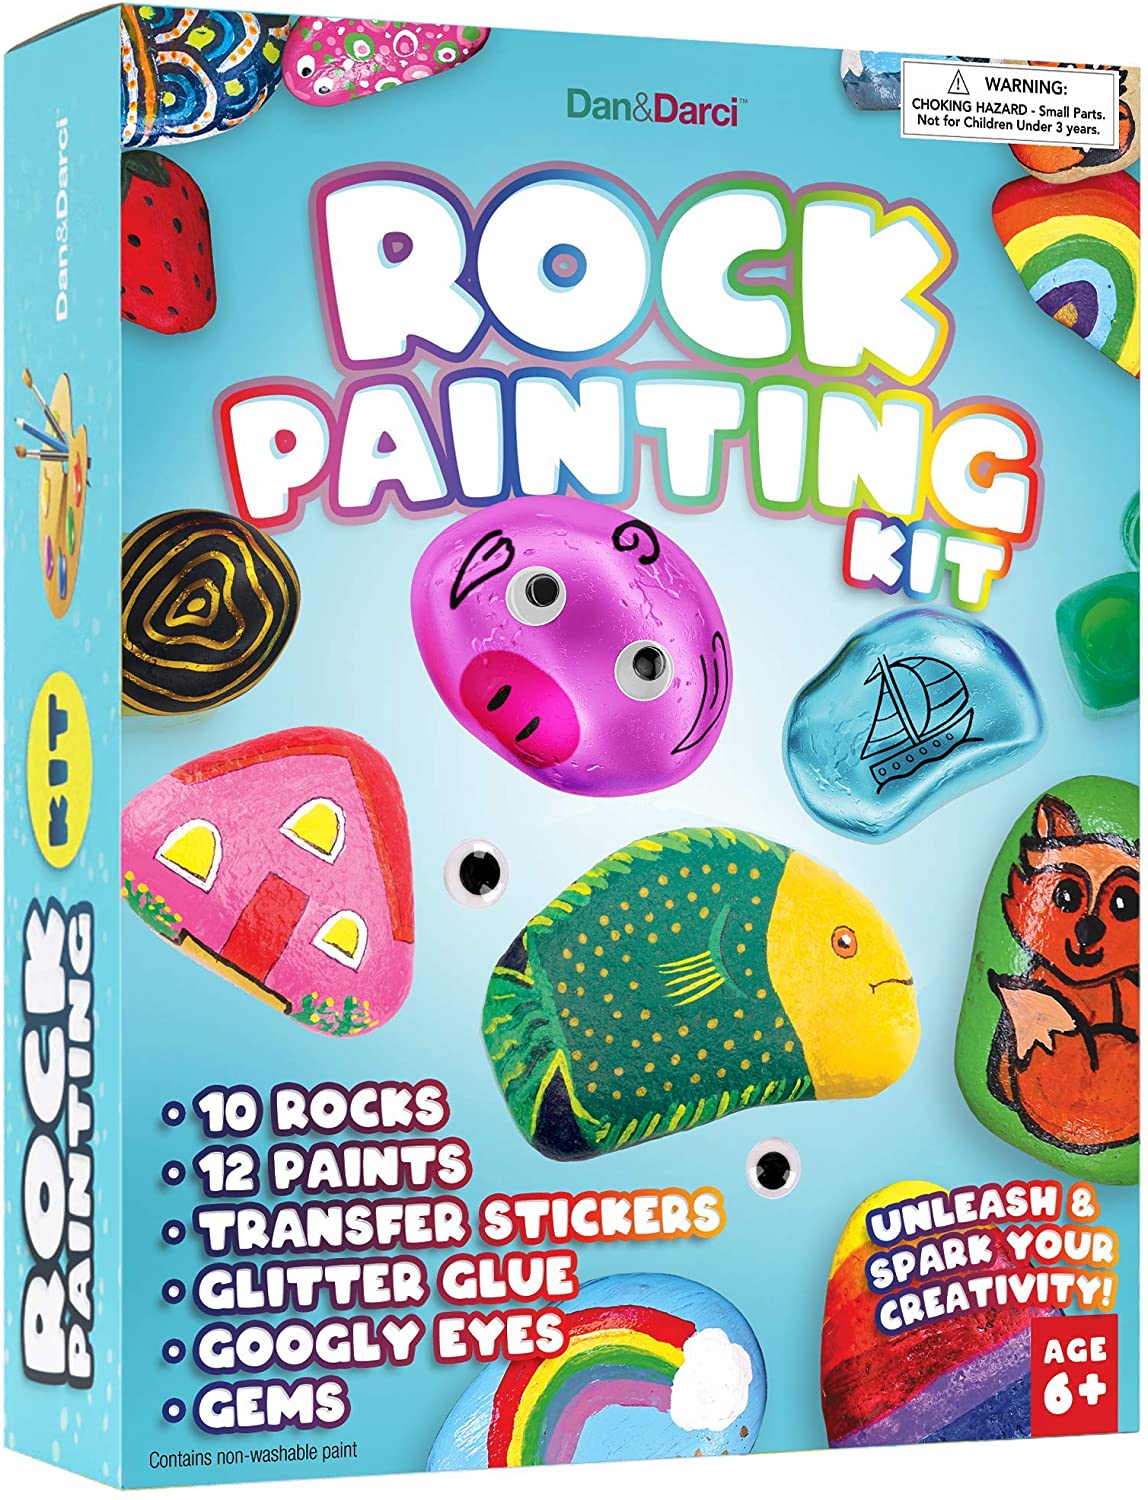 Dan&#x26;Darci Rock Painting Kit for Kids - Arts and Crafts for Girls &#x26; Boys Ages 6-12 - Craft Kits Art Set - Supplies for Painting Rocks - Best Tween Paint Gift